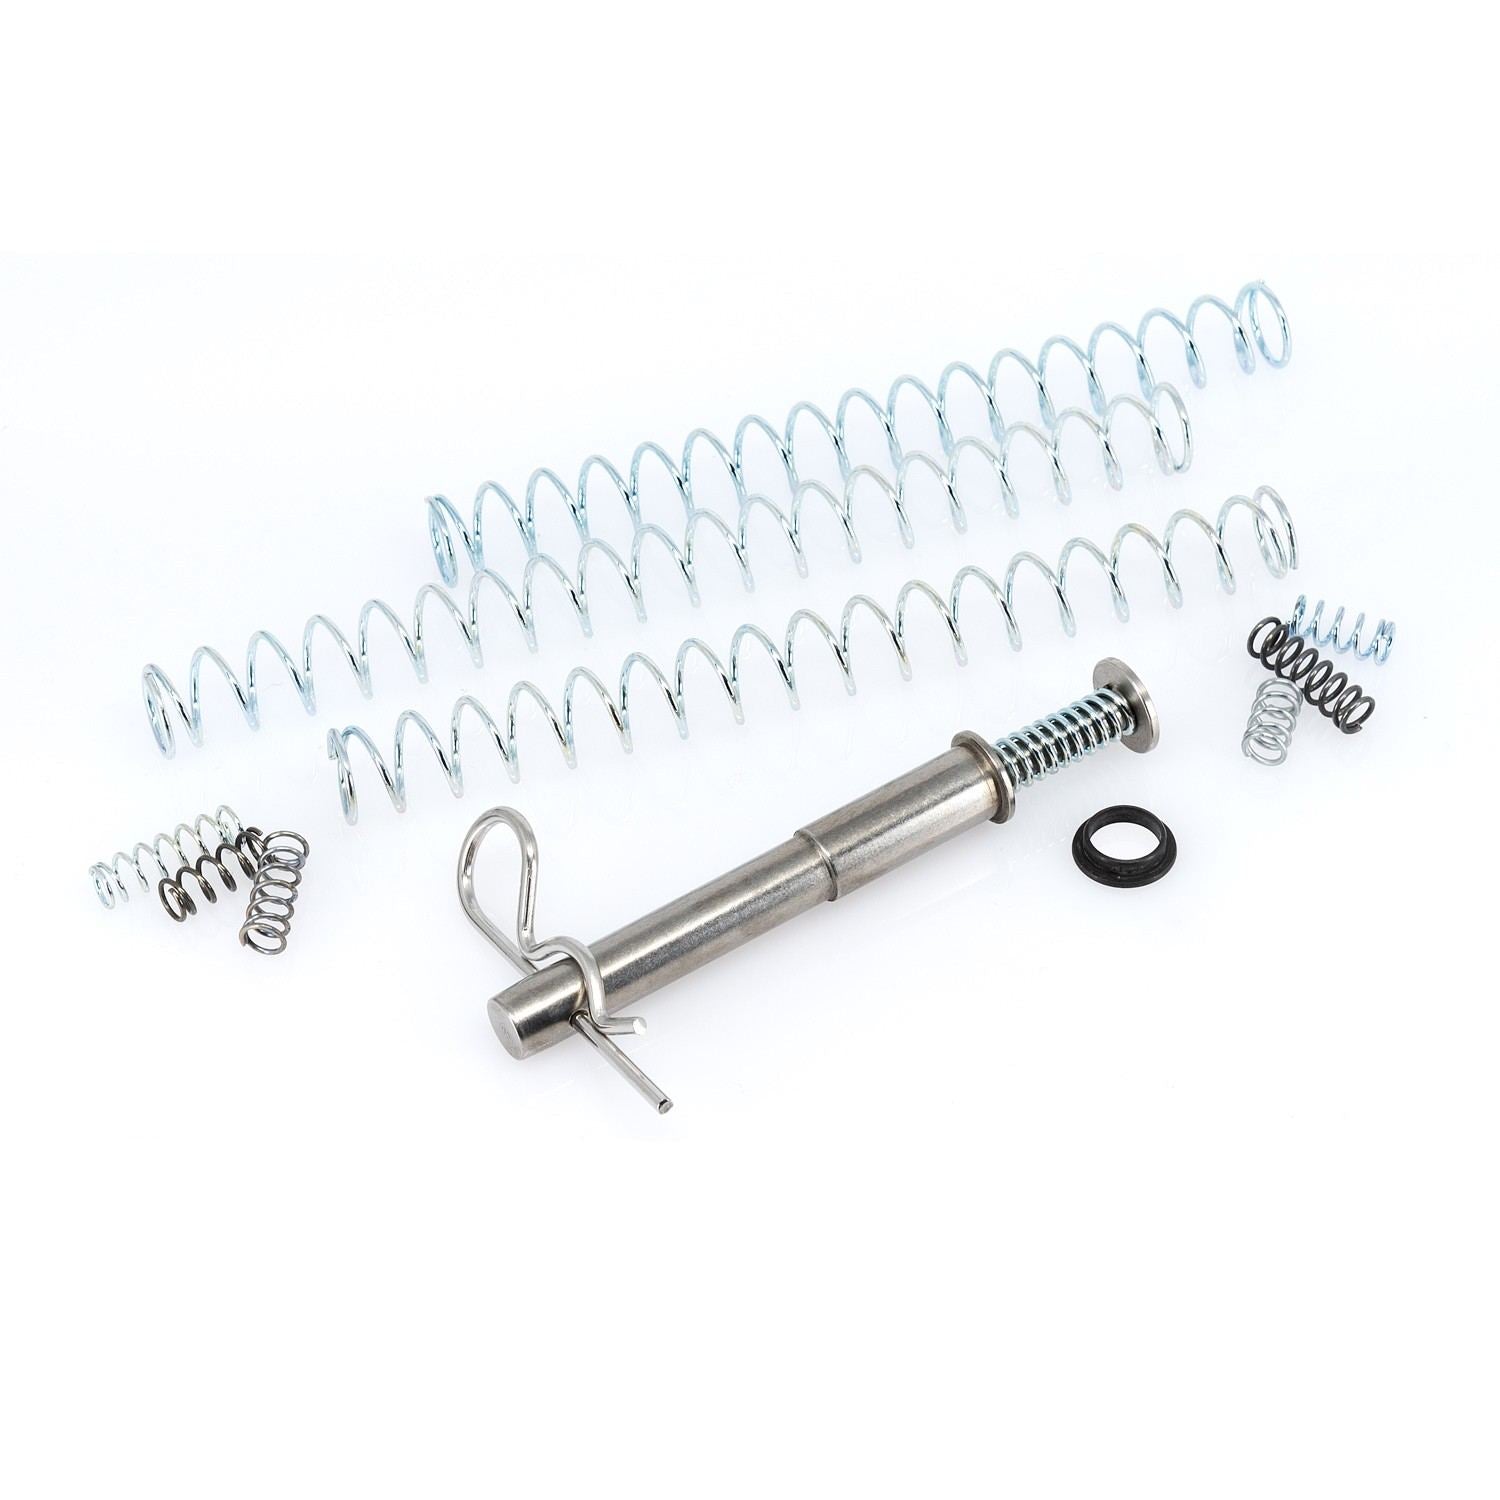 WALTHER SPRING KIT